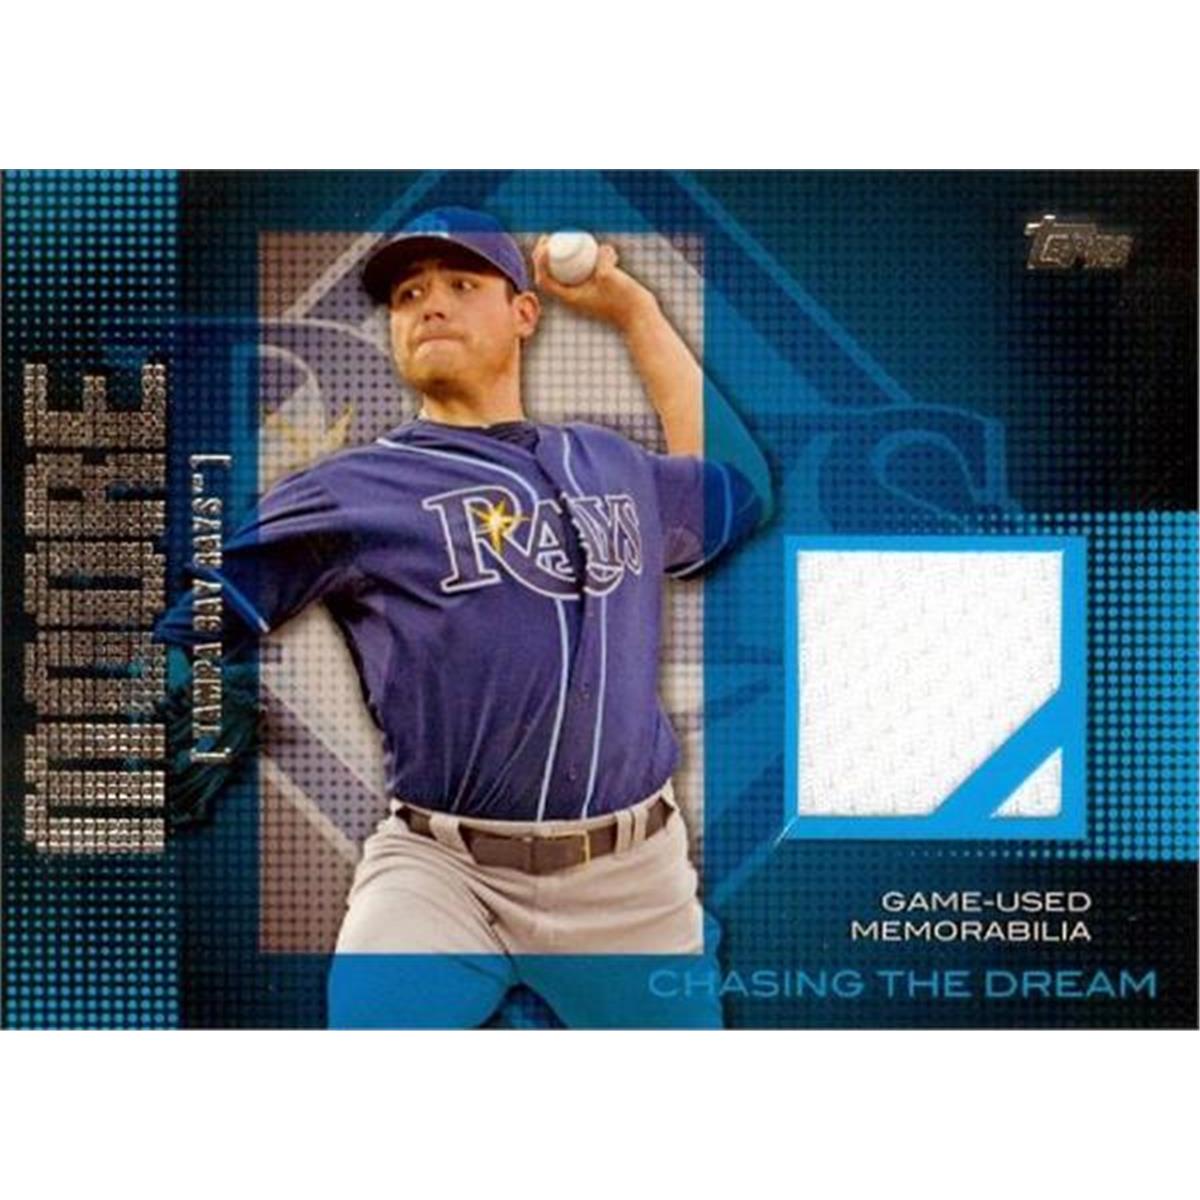 Picture of Autograph Warehouse 388386 Matt Moore Player Worn Jersey Patch Baseball Card - 2013 Topps Chasing the Dream-CDRMAM